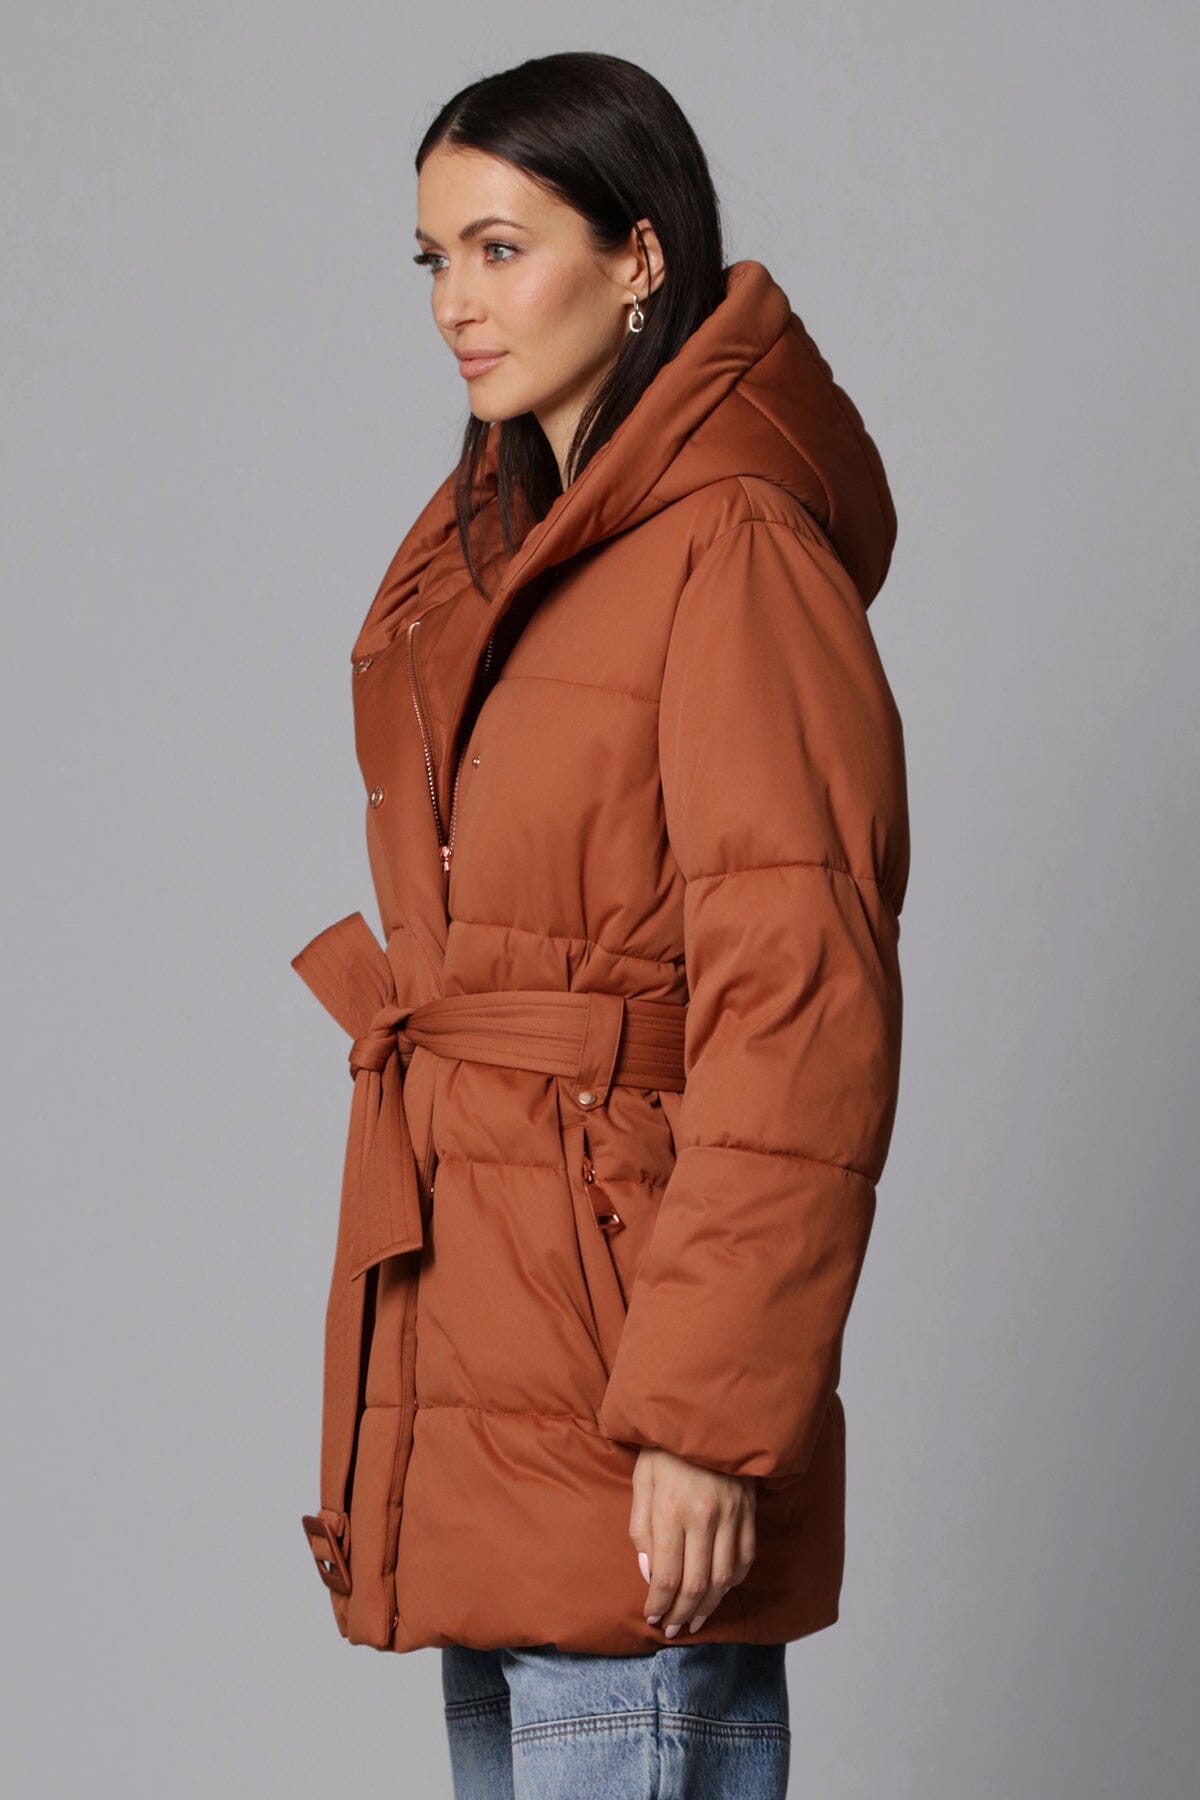 star quilted thermal puff wrap puffer coat jacket cedar brown - figure flattering designer fashion cute winter 2023 coats jackets for women